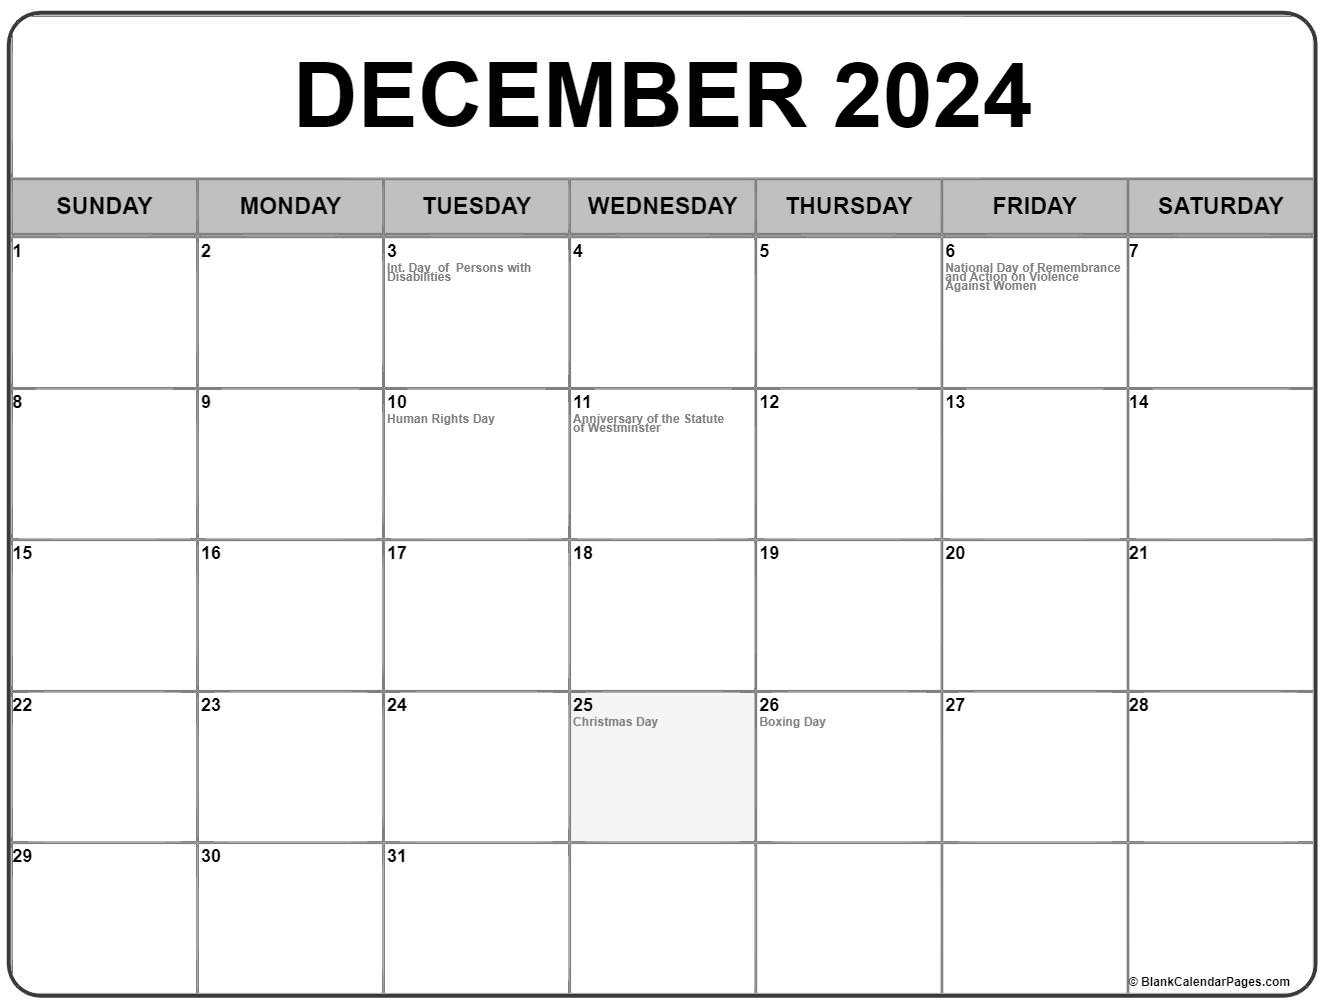 December 2021 Calendar With Holidays,Master Forge Grill